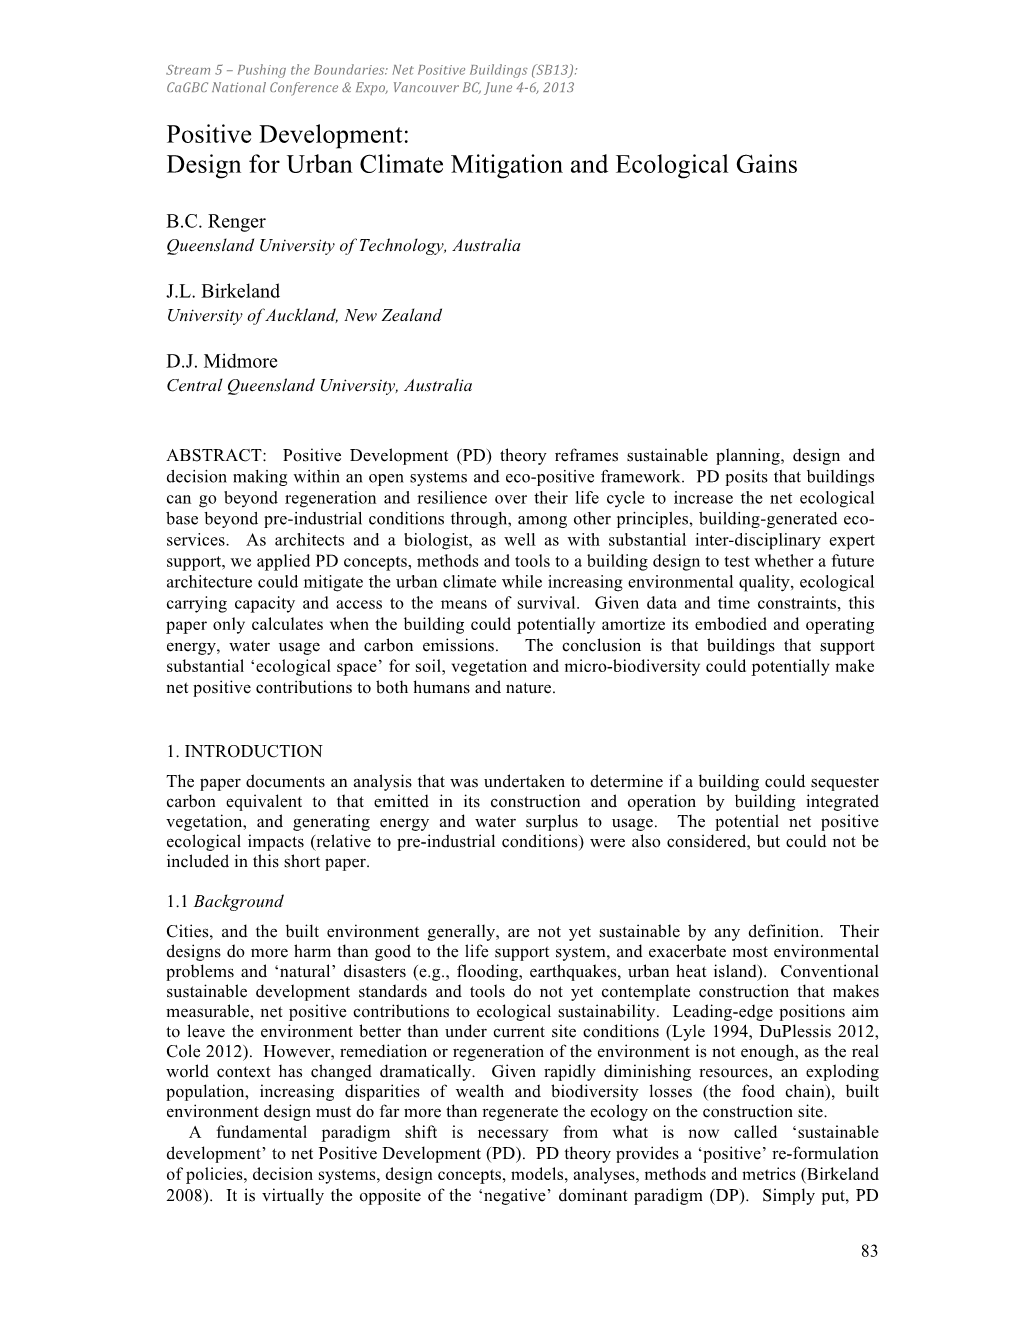 Positive Development: Design for Urban Climate Mitigation and Ecological Gains